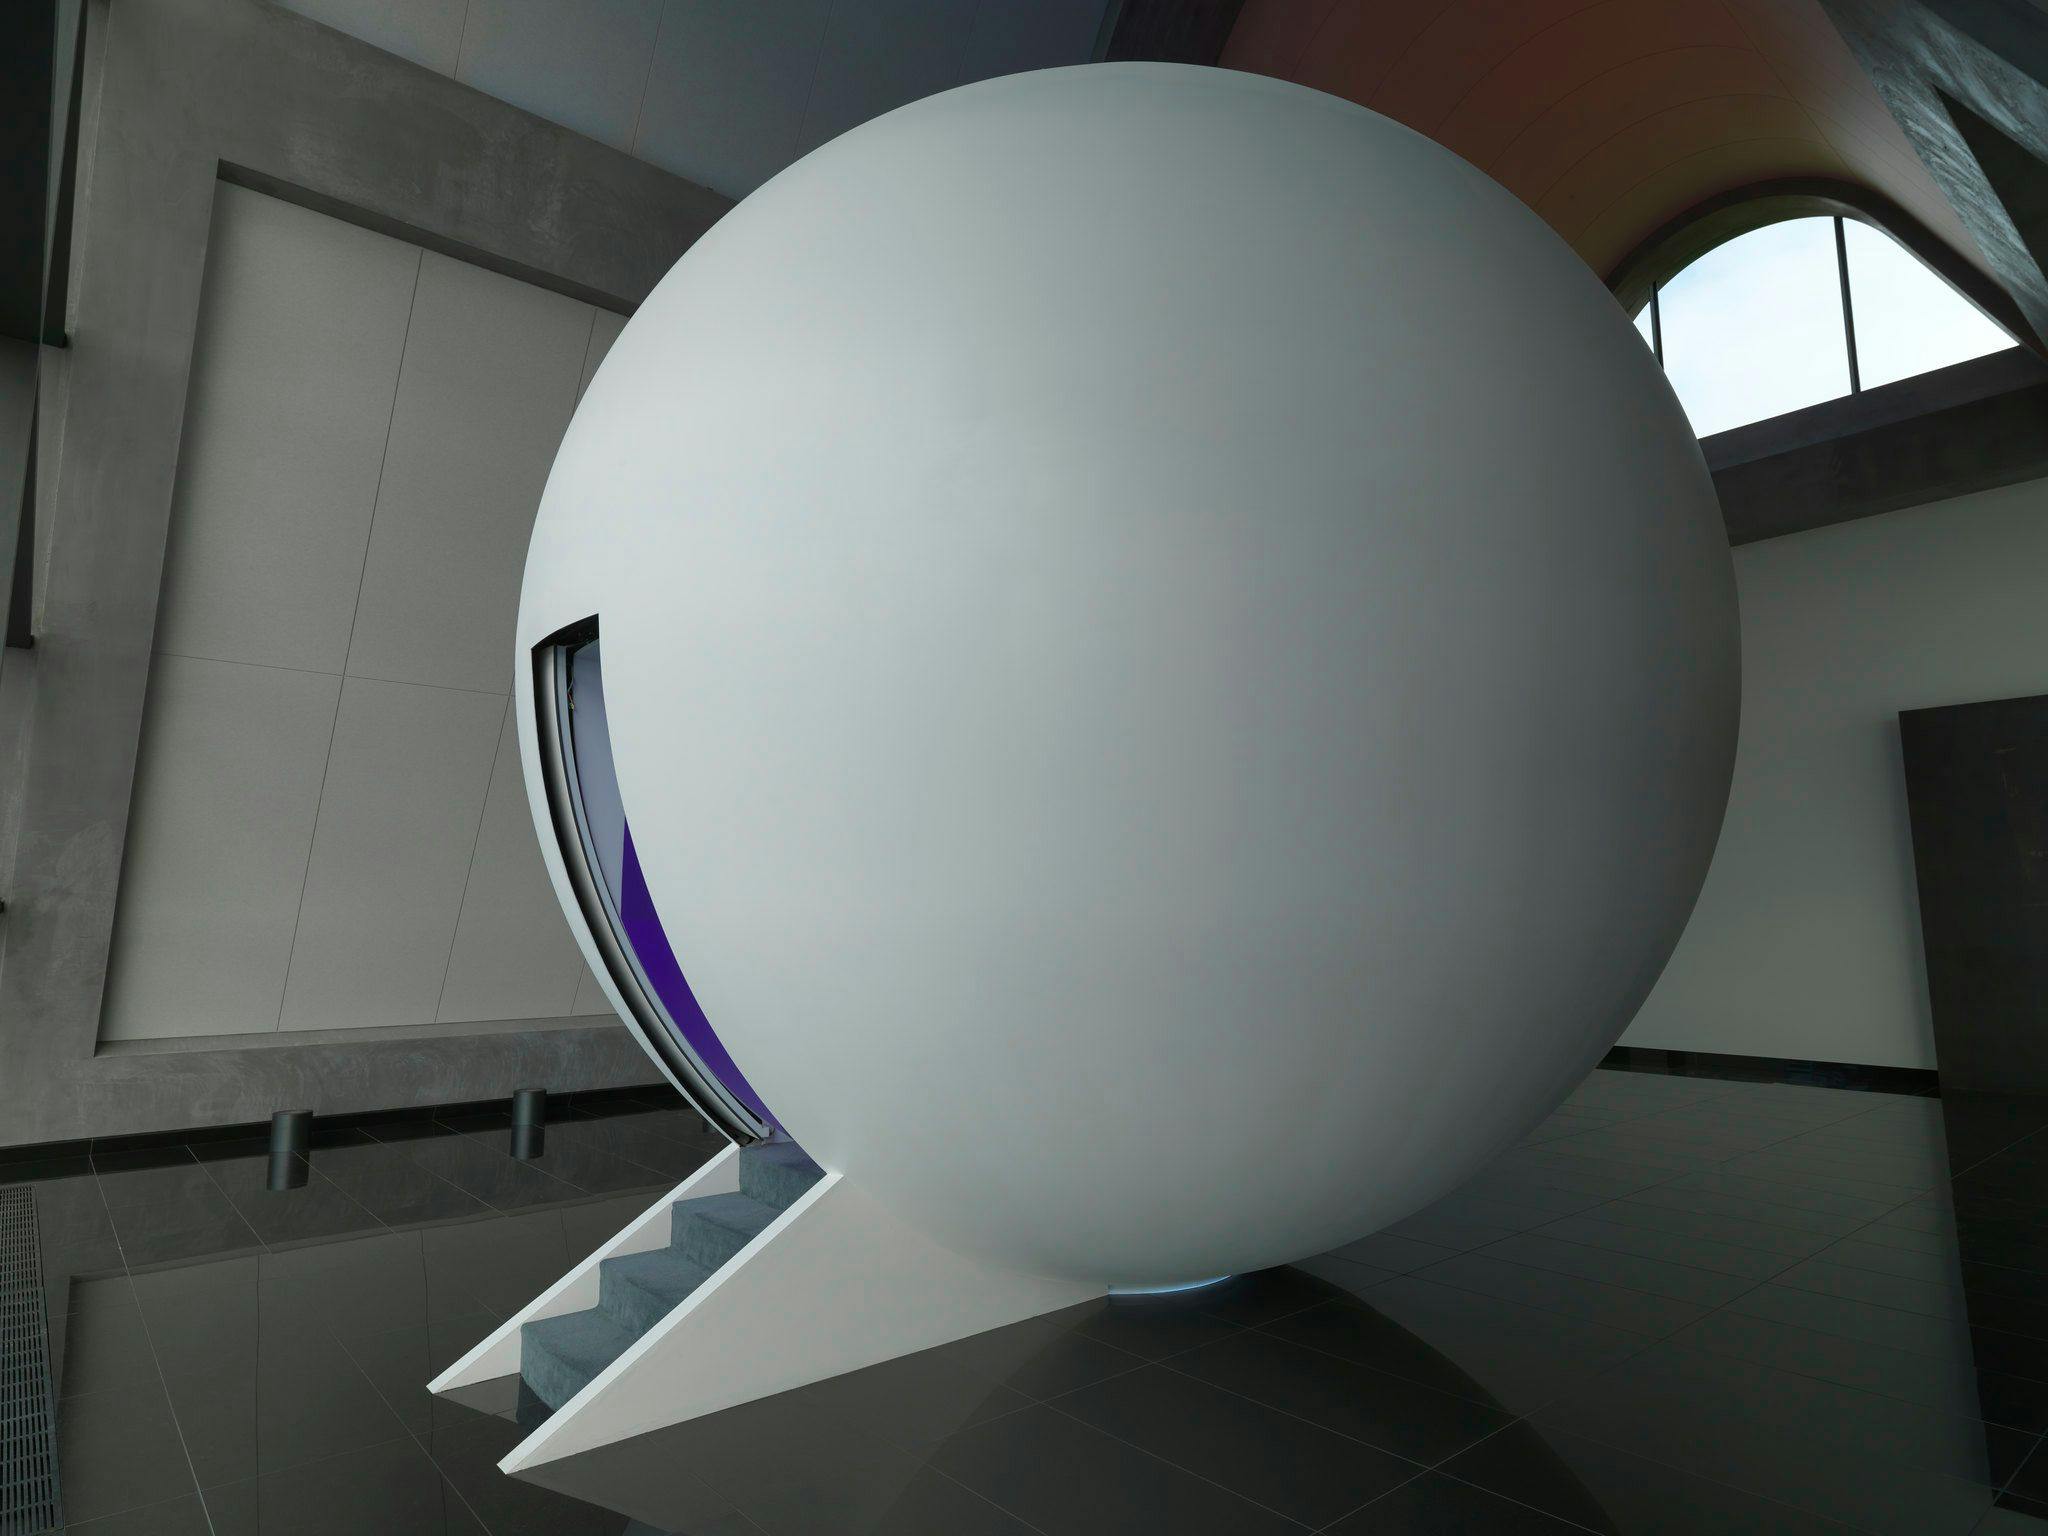 A large white sphere sits in the middle of our restaurant 'Faro'. On the left side of the sphere, a small staircase leads up to a doorway that allows entry into the dome.